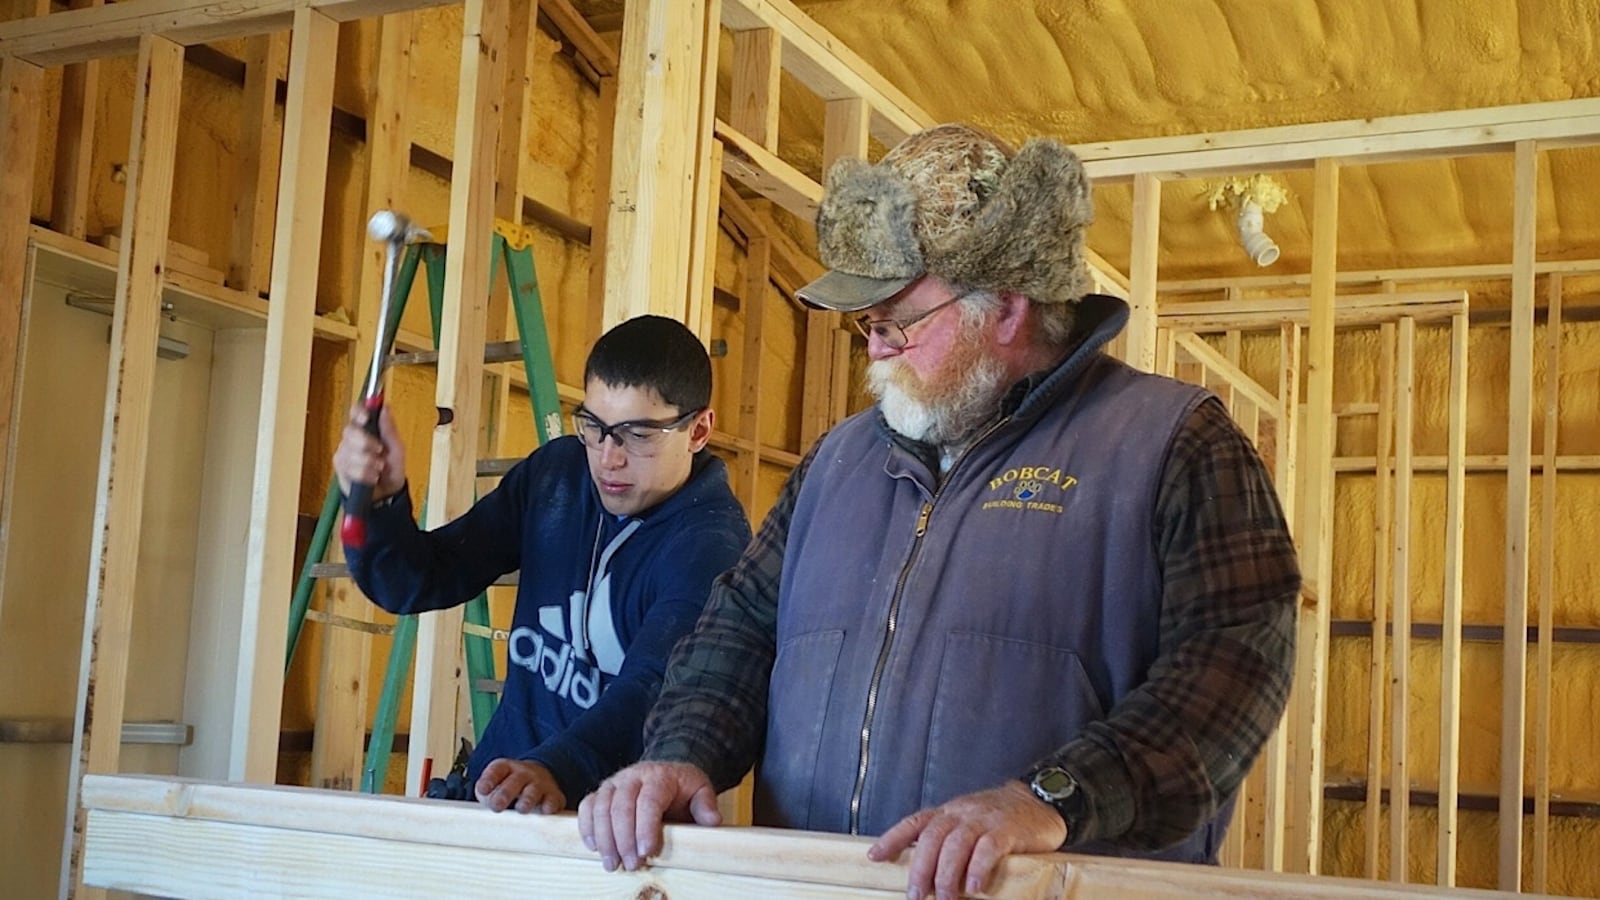 Ray Perez, a sophomore at Custer County High School, works with instructor Bruce May on a project that will convert a former preschool building into teacher housing.